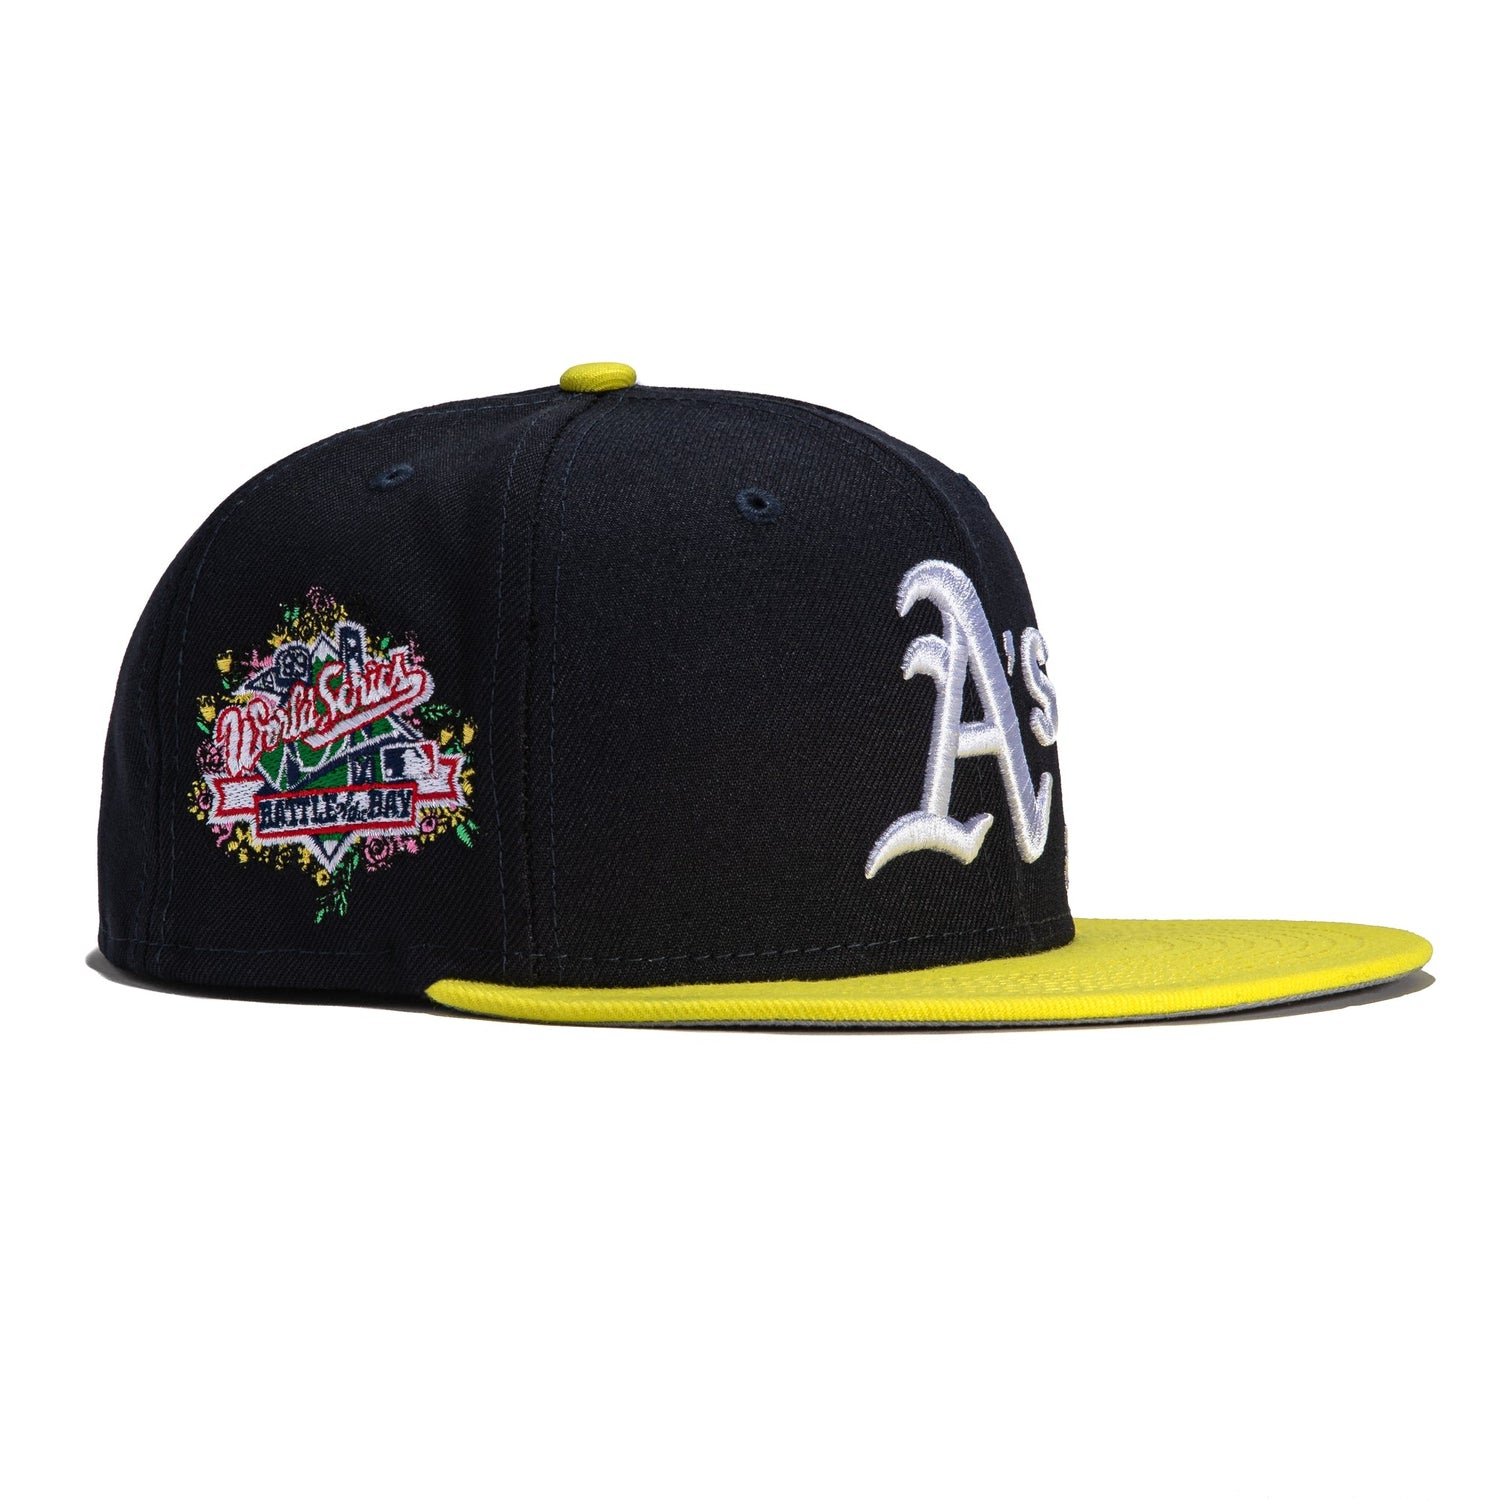 Kelly green forever. Oakland Athletics team-issued throwback